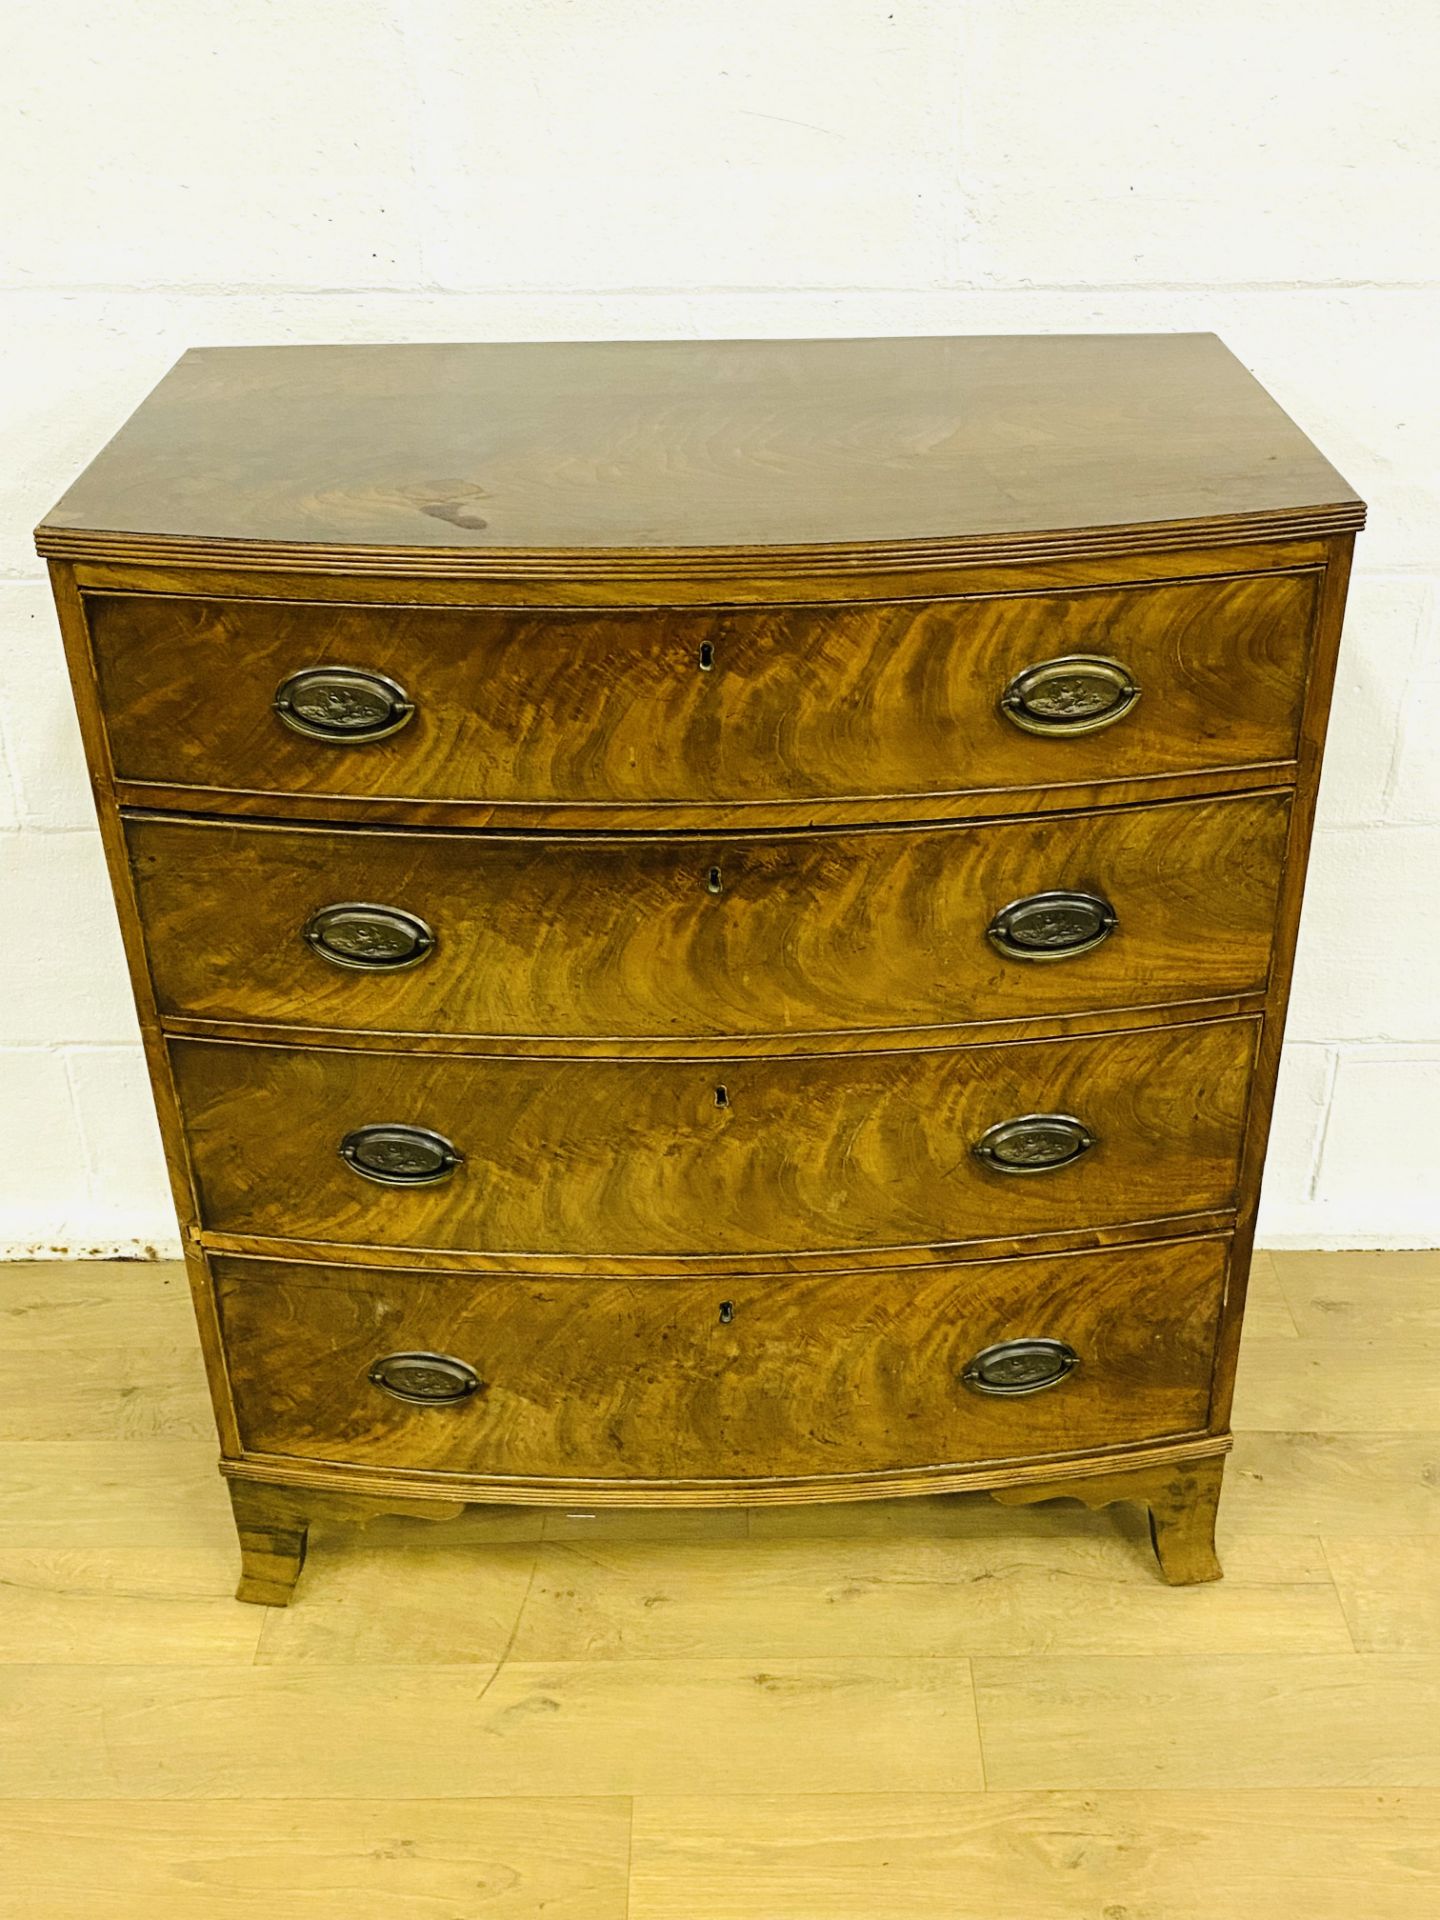 Bow fronted chest of drawers - Image 2 of 8